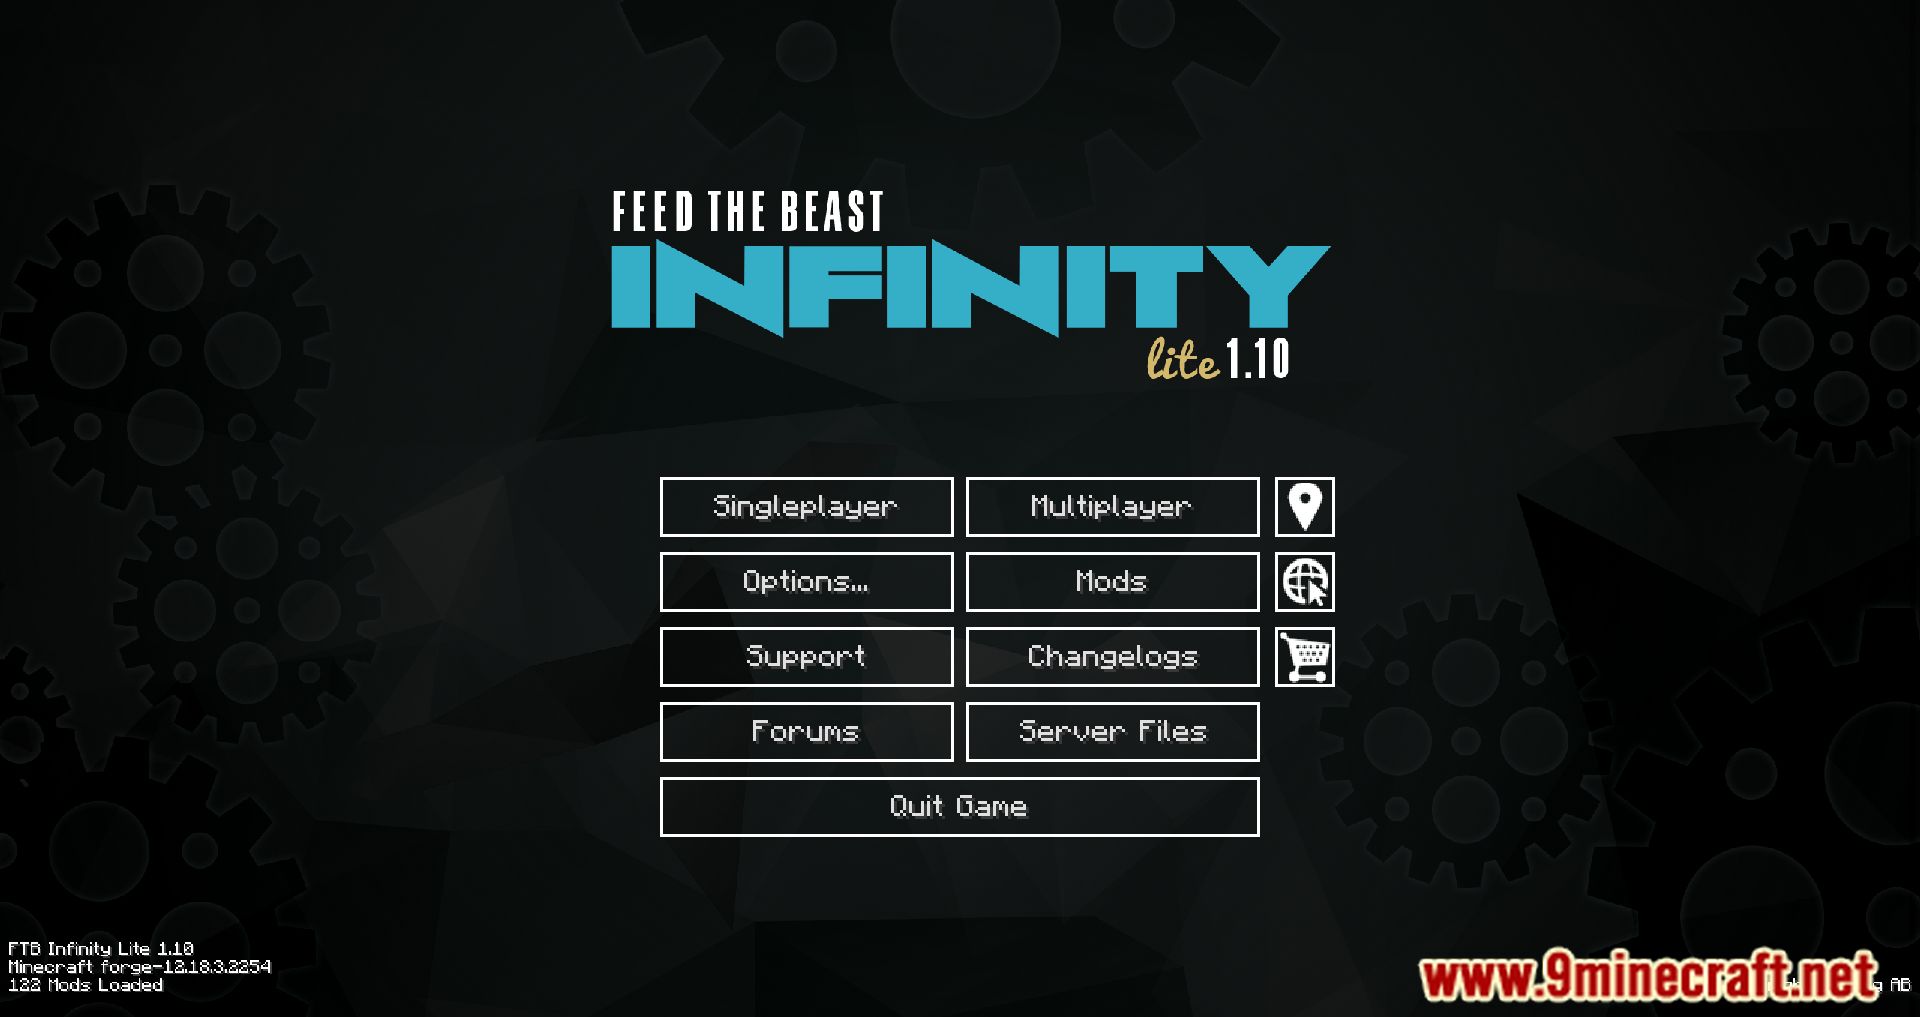 FTB Infinity Lite Modpack (1.10.2) - A Mix Of Tech And Magic!!! 2